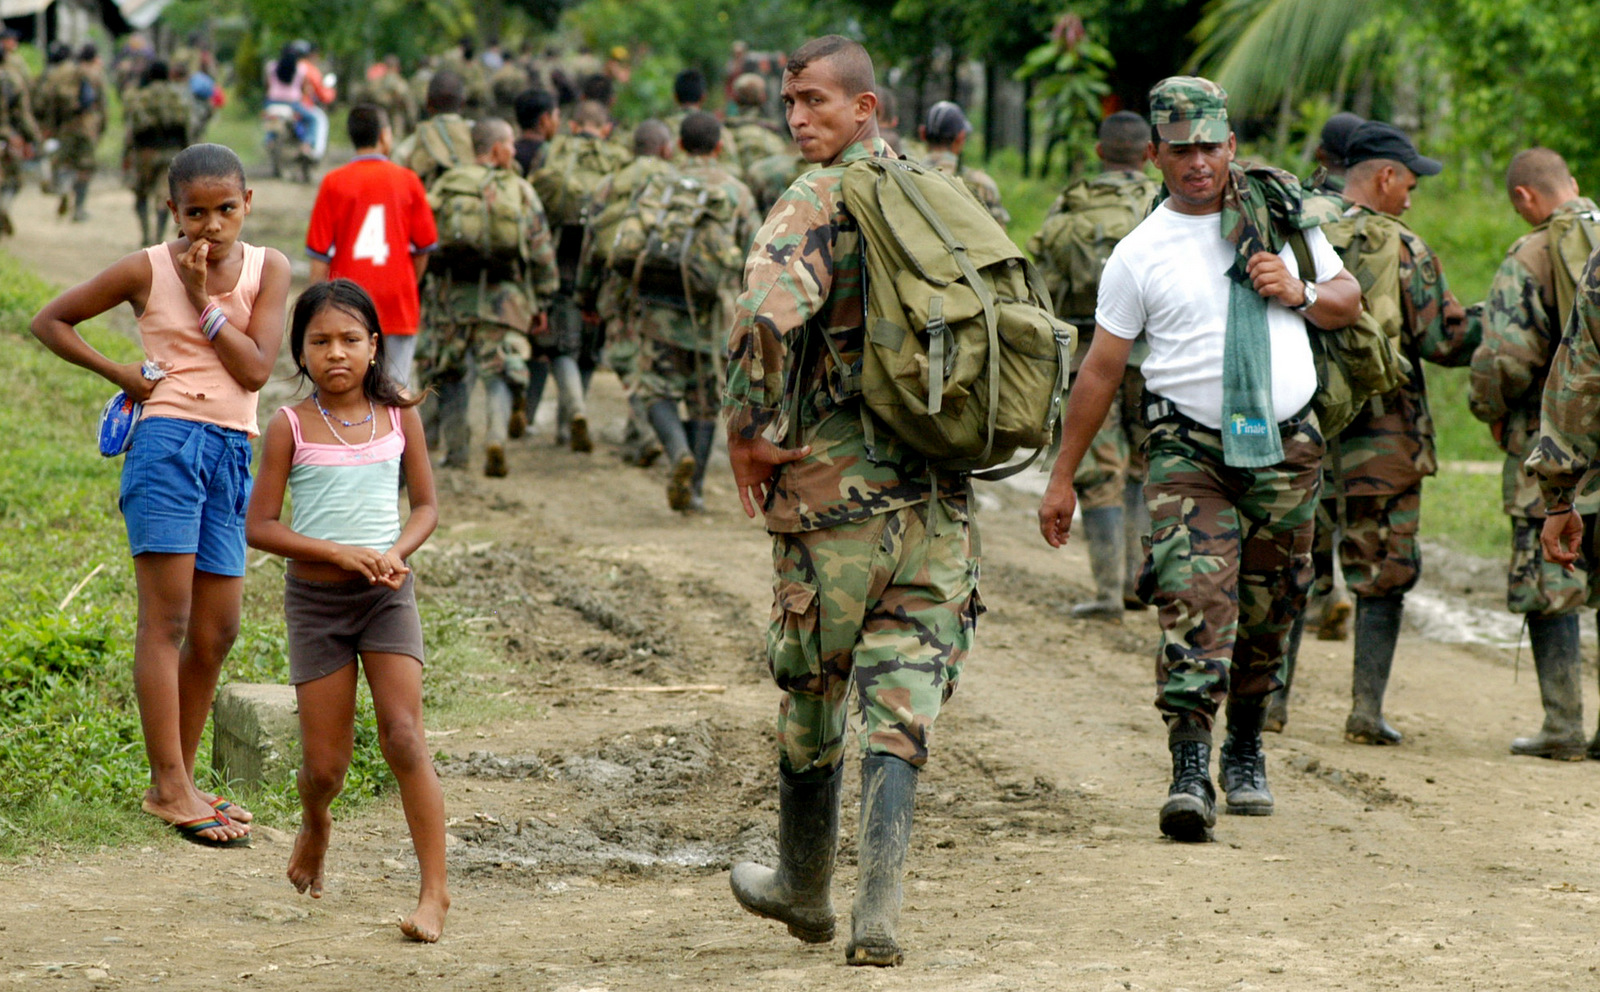 In this photograph provided by the El Tiempo newspaper, paramilitary fighters of the "Banana Bloc", known as the United Self-Defense Forces of Colombia, or AUC arrive at a rural area outside of the northwestern Colombian town of Turbo, Nov. , 2004. (AP/Julio Cesar Herrera/El Tiempo)